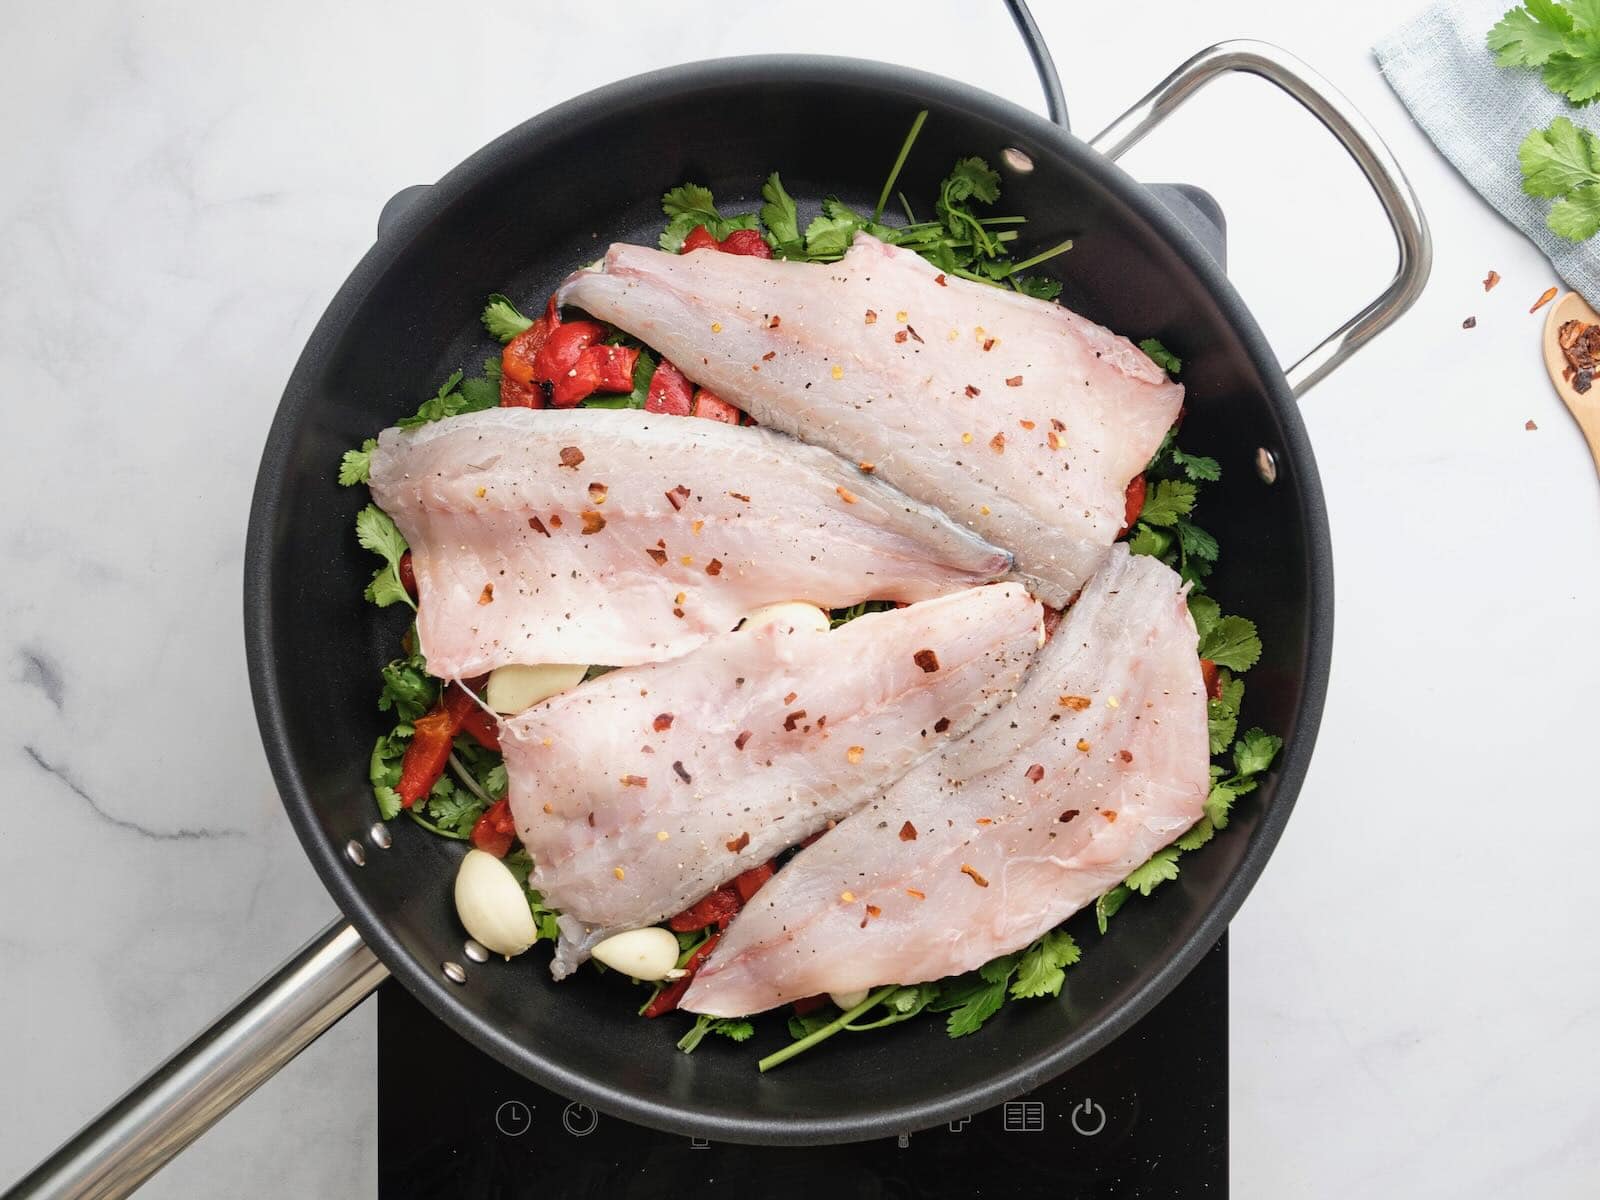 Horizontal overhead shot of a black sautee pan containing four white fish fillets laying on top of a bed of greens, red peppers, and garlic cloves.